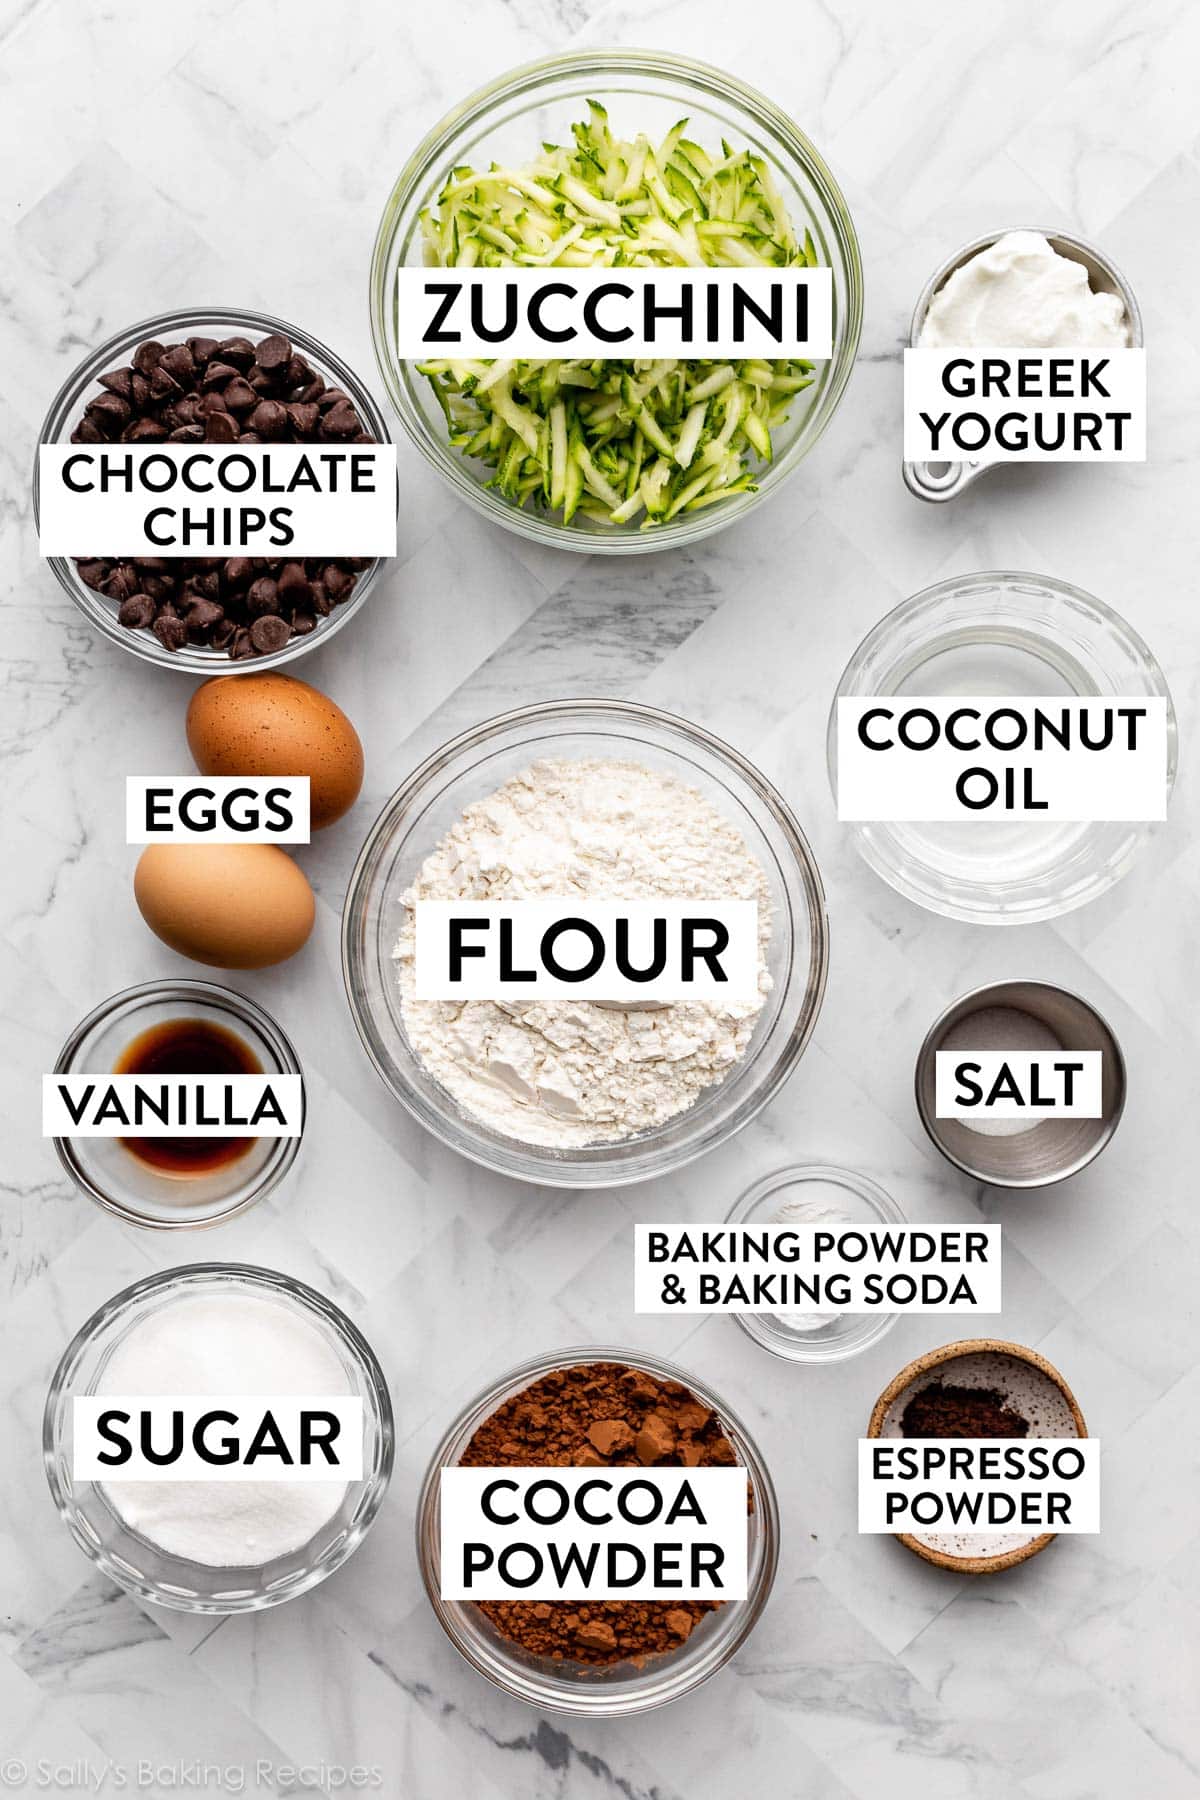 flour, coconut oil, cocoa powder, sugar, eggs, chocolate chips, and shredded zucchini in bowls on marble backdrop.